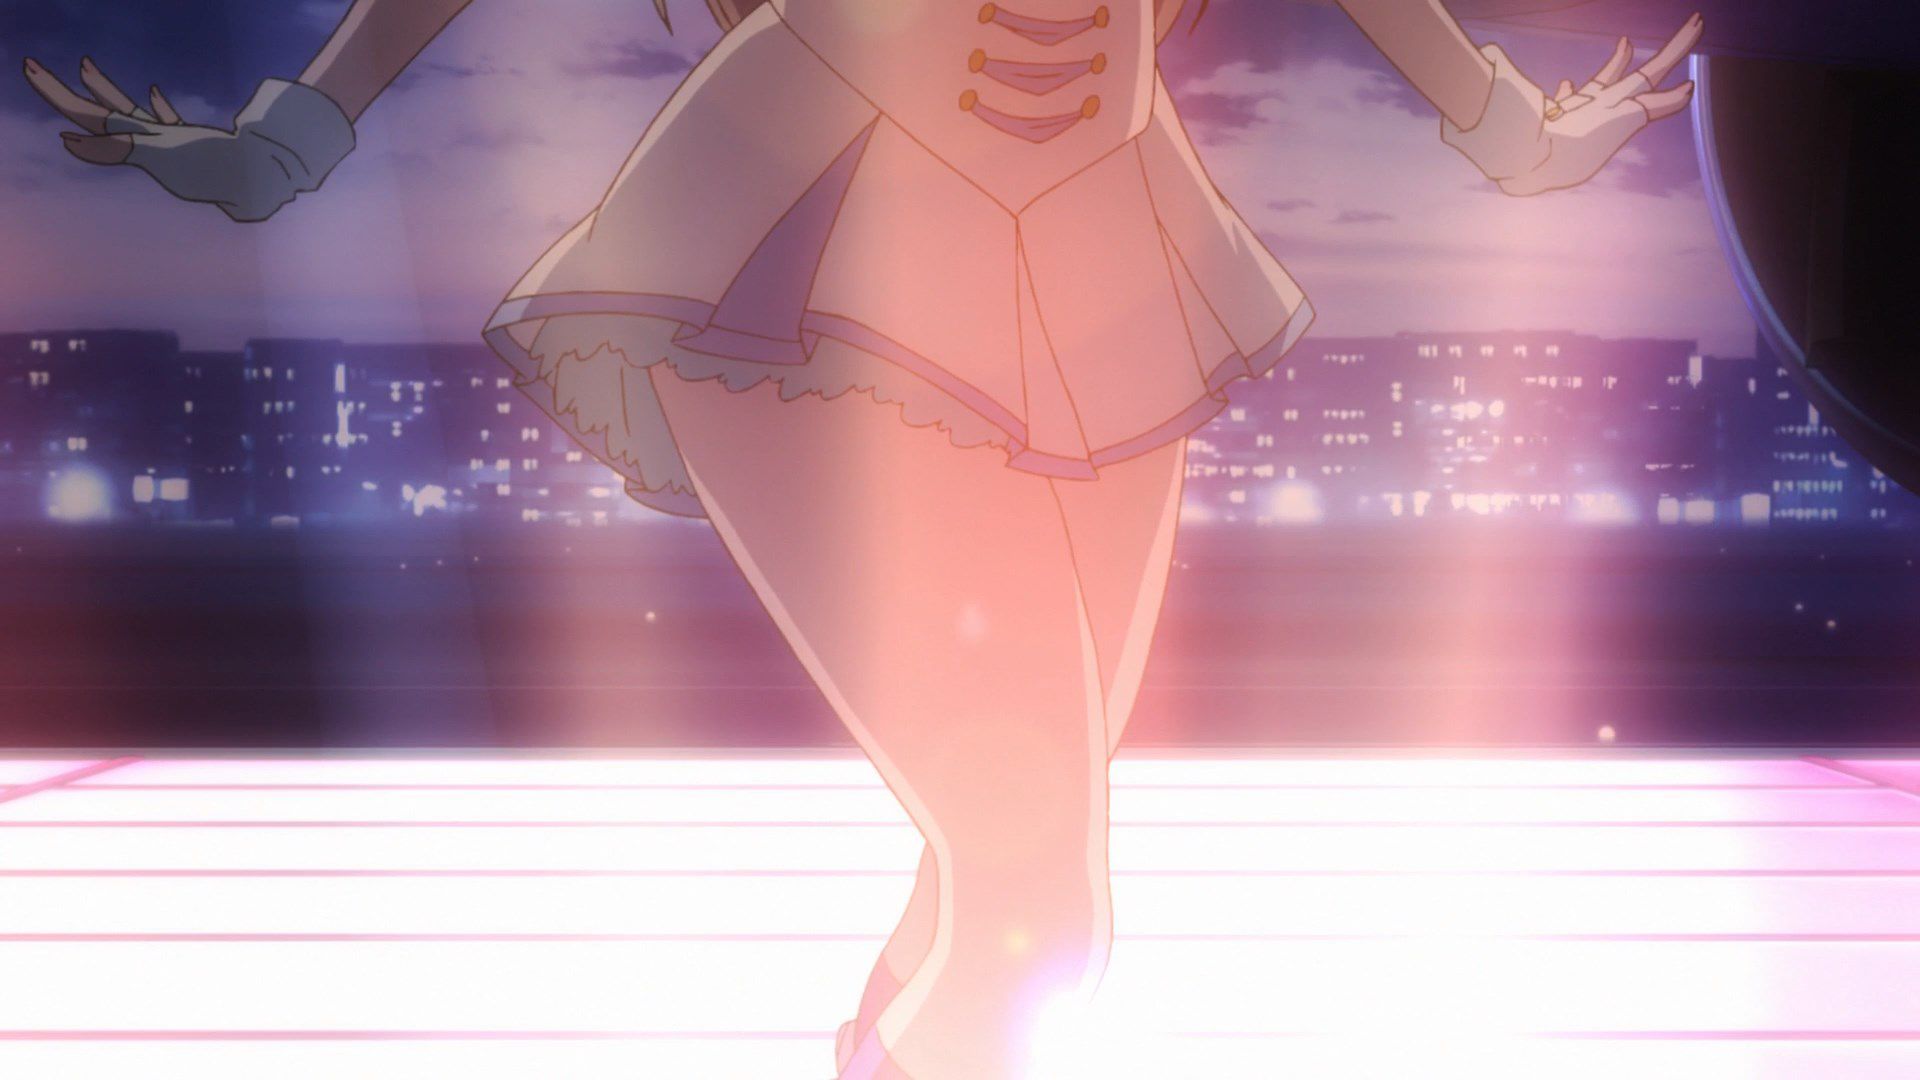 [God images] "love live! ' Μm ' PV's leg is too erotic everyone wakes up to a leg fetish of wwwww 23